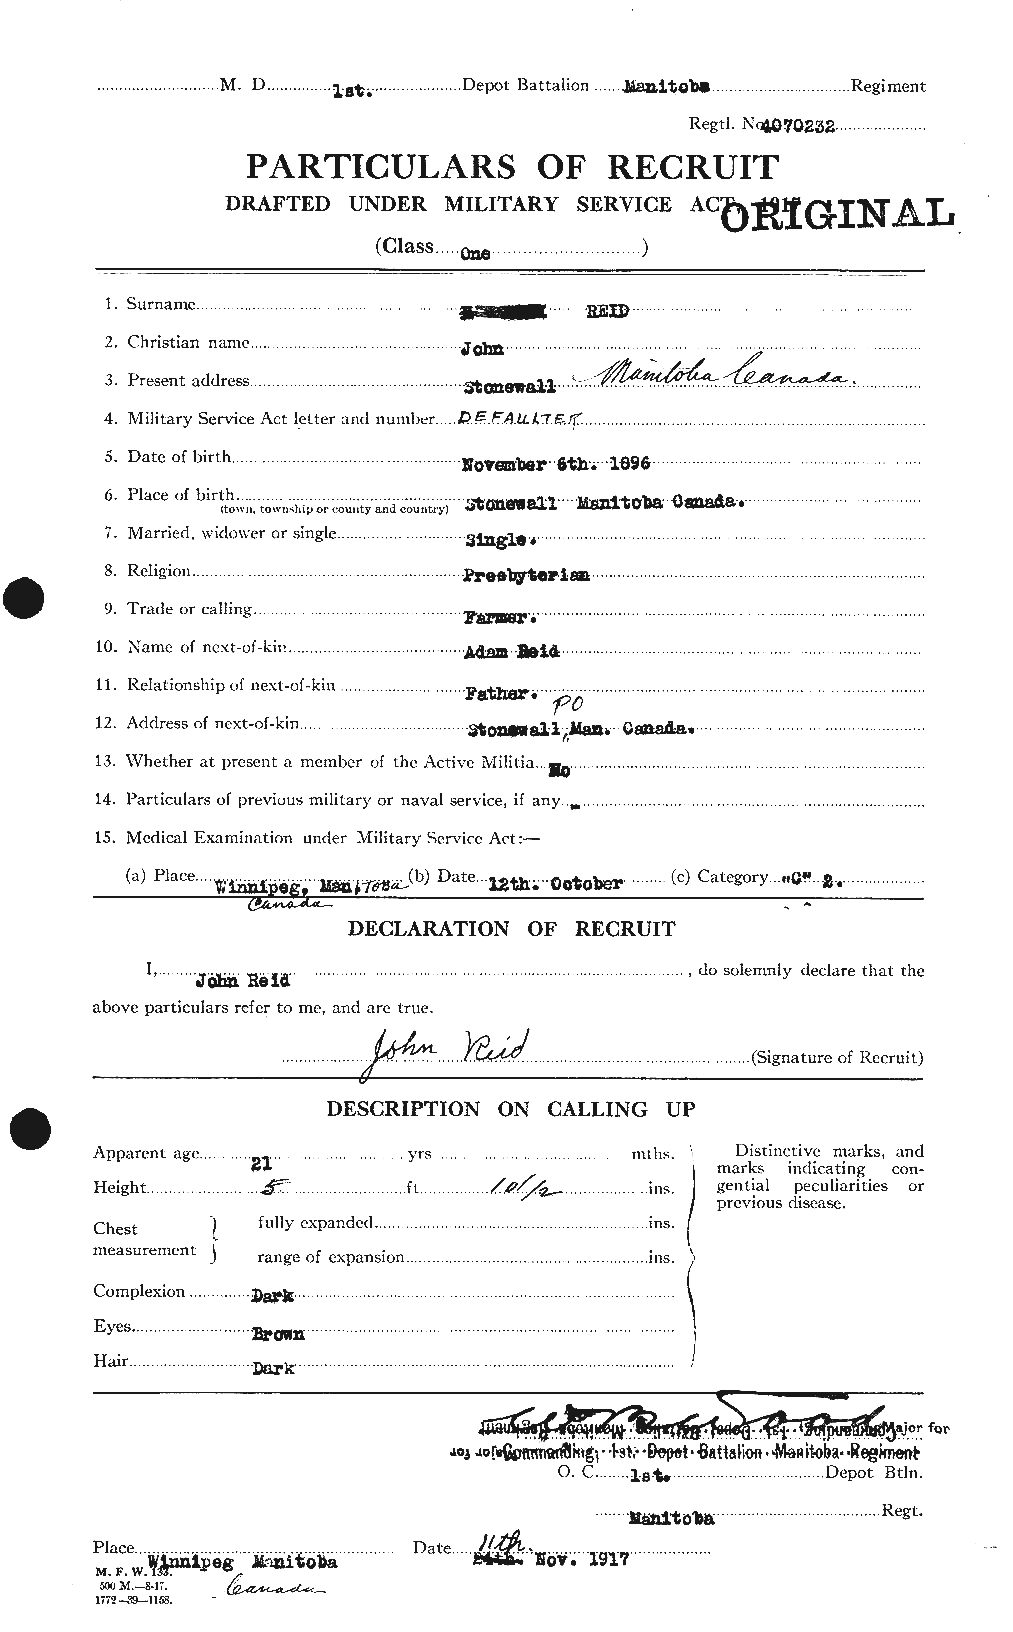 Personnel Records of the First World War - CEF 598765a